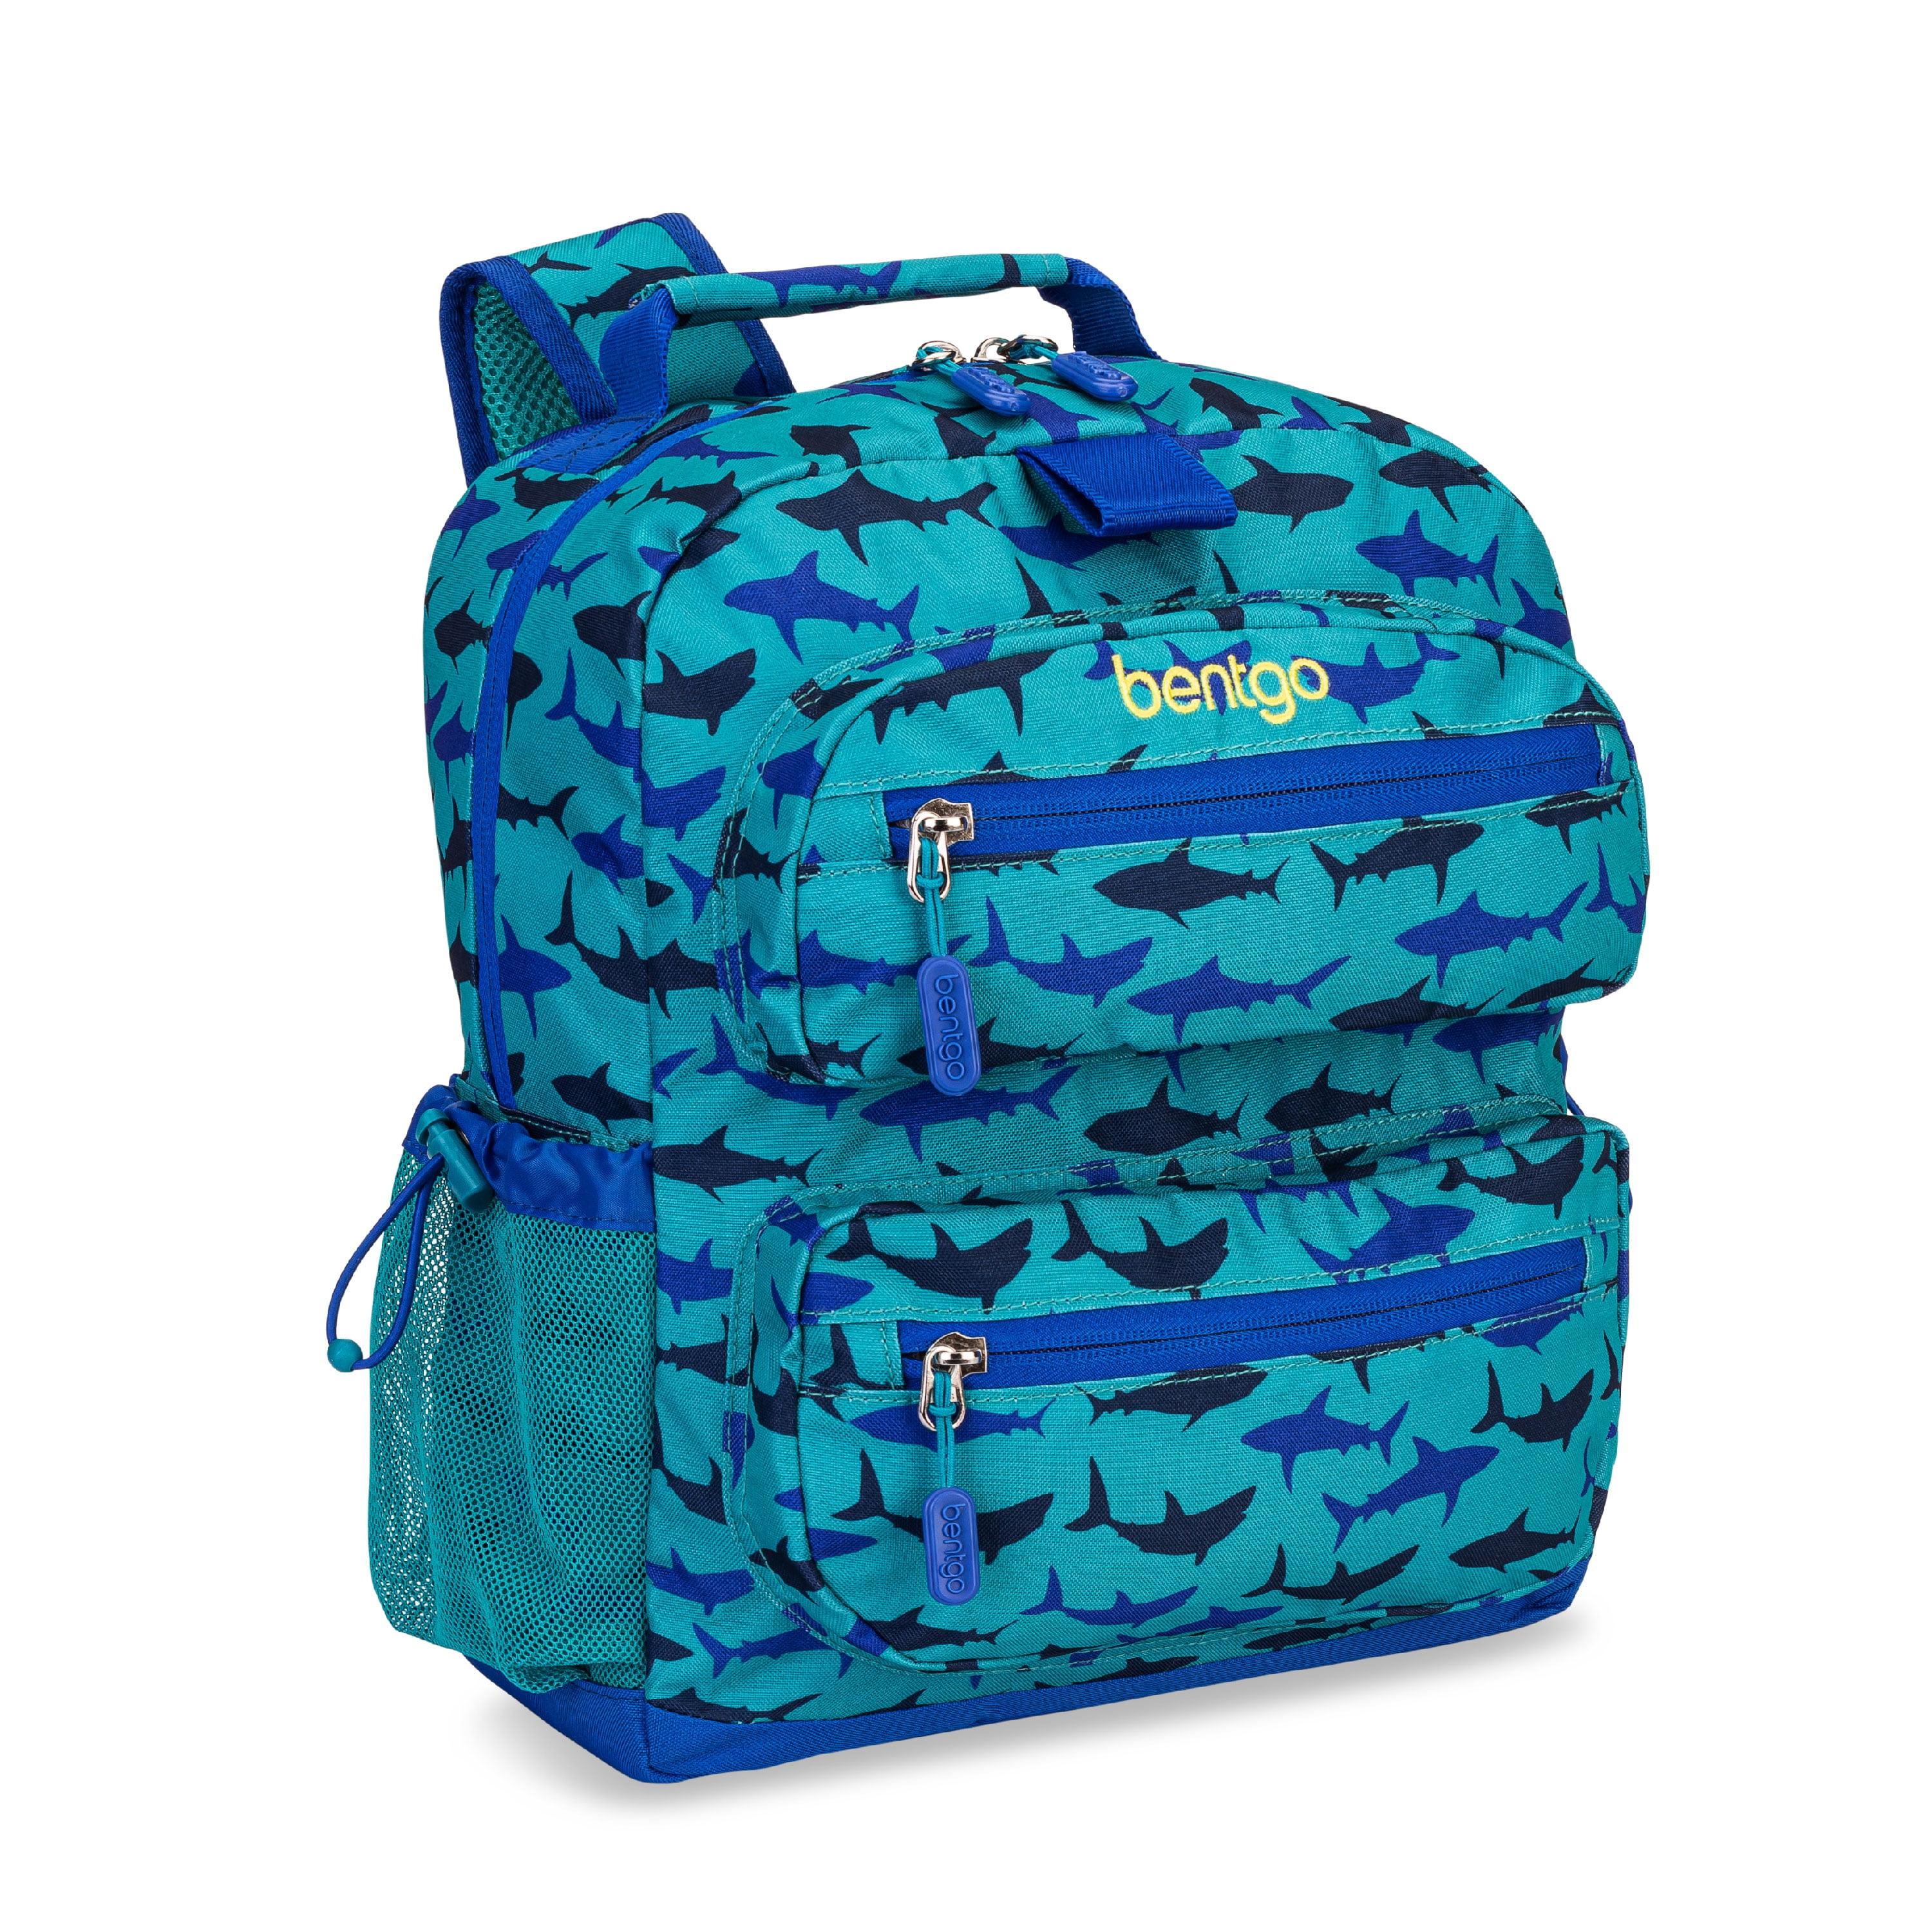 Bentgo® Kids Backpack - Lightweight 14” Backpack in Unique Prints for  School, Travel, & Daycare - Roomy Interior, Durable & Water-Resistant  Fabric, & Loop for Lunch Bag (Shark) 